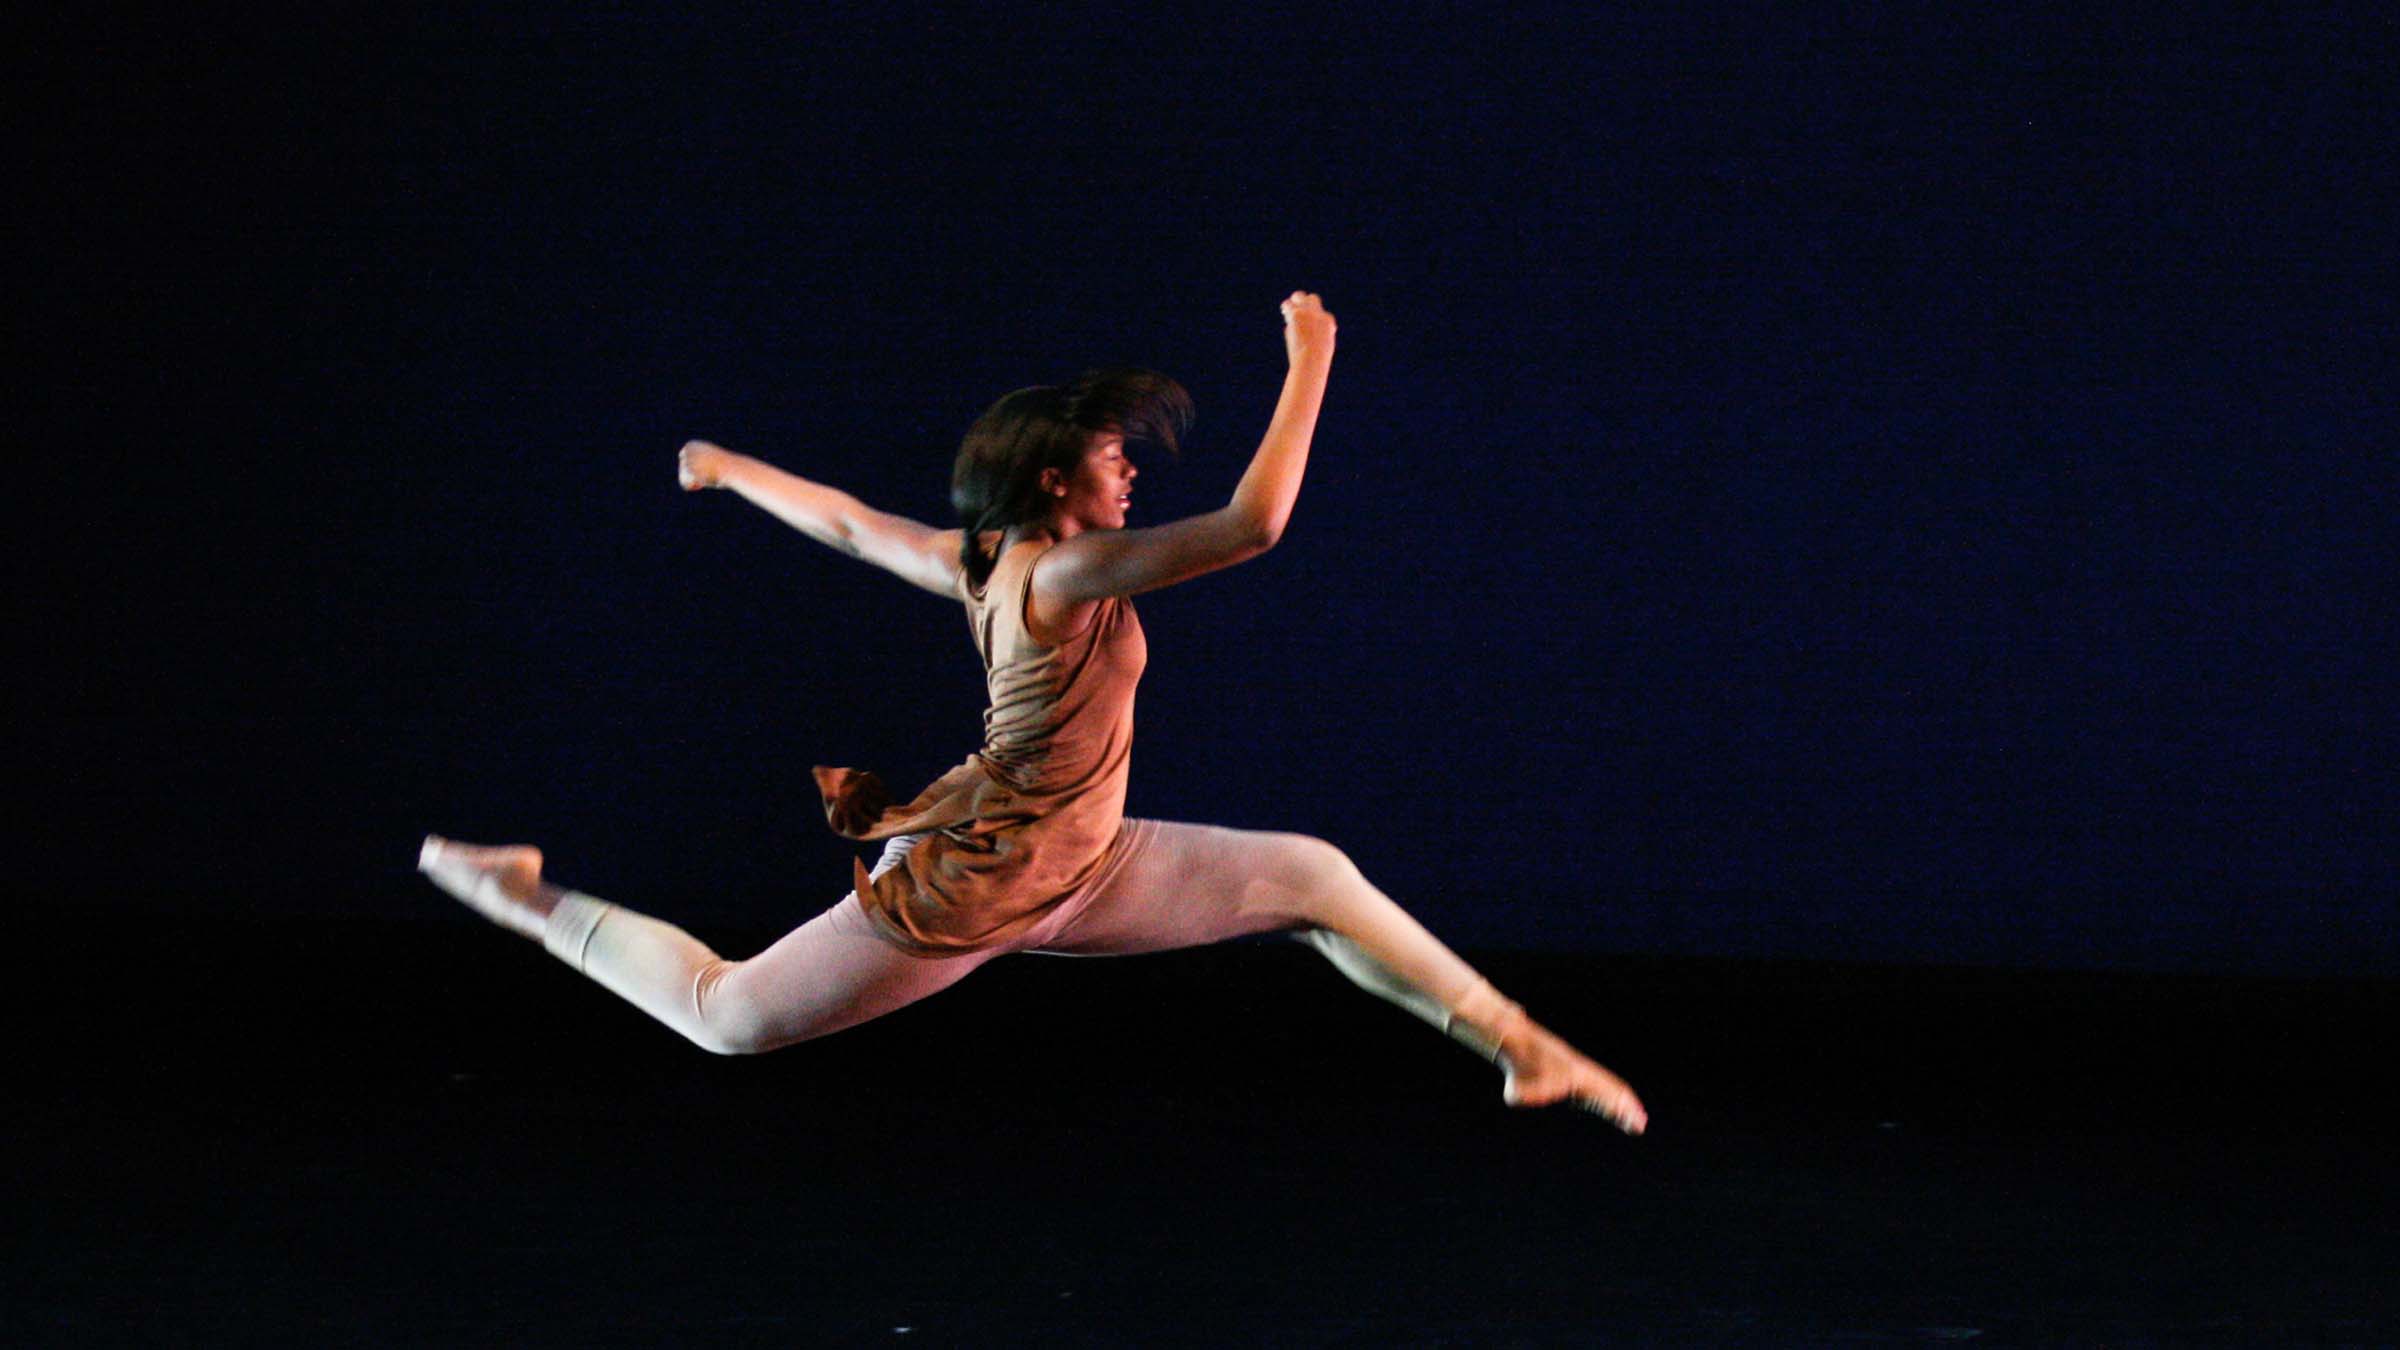 A dancer caught in mid-leap on a darkened stage. Photo by Madeline Zappala ’12.